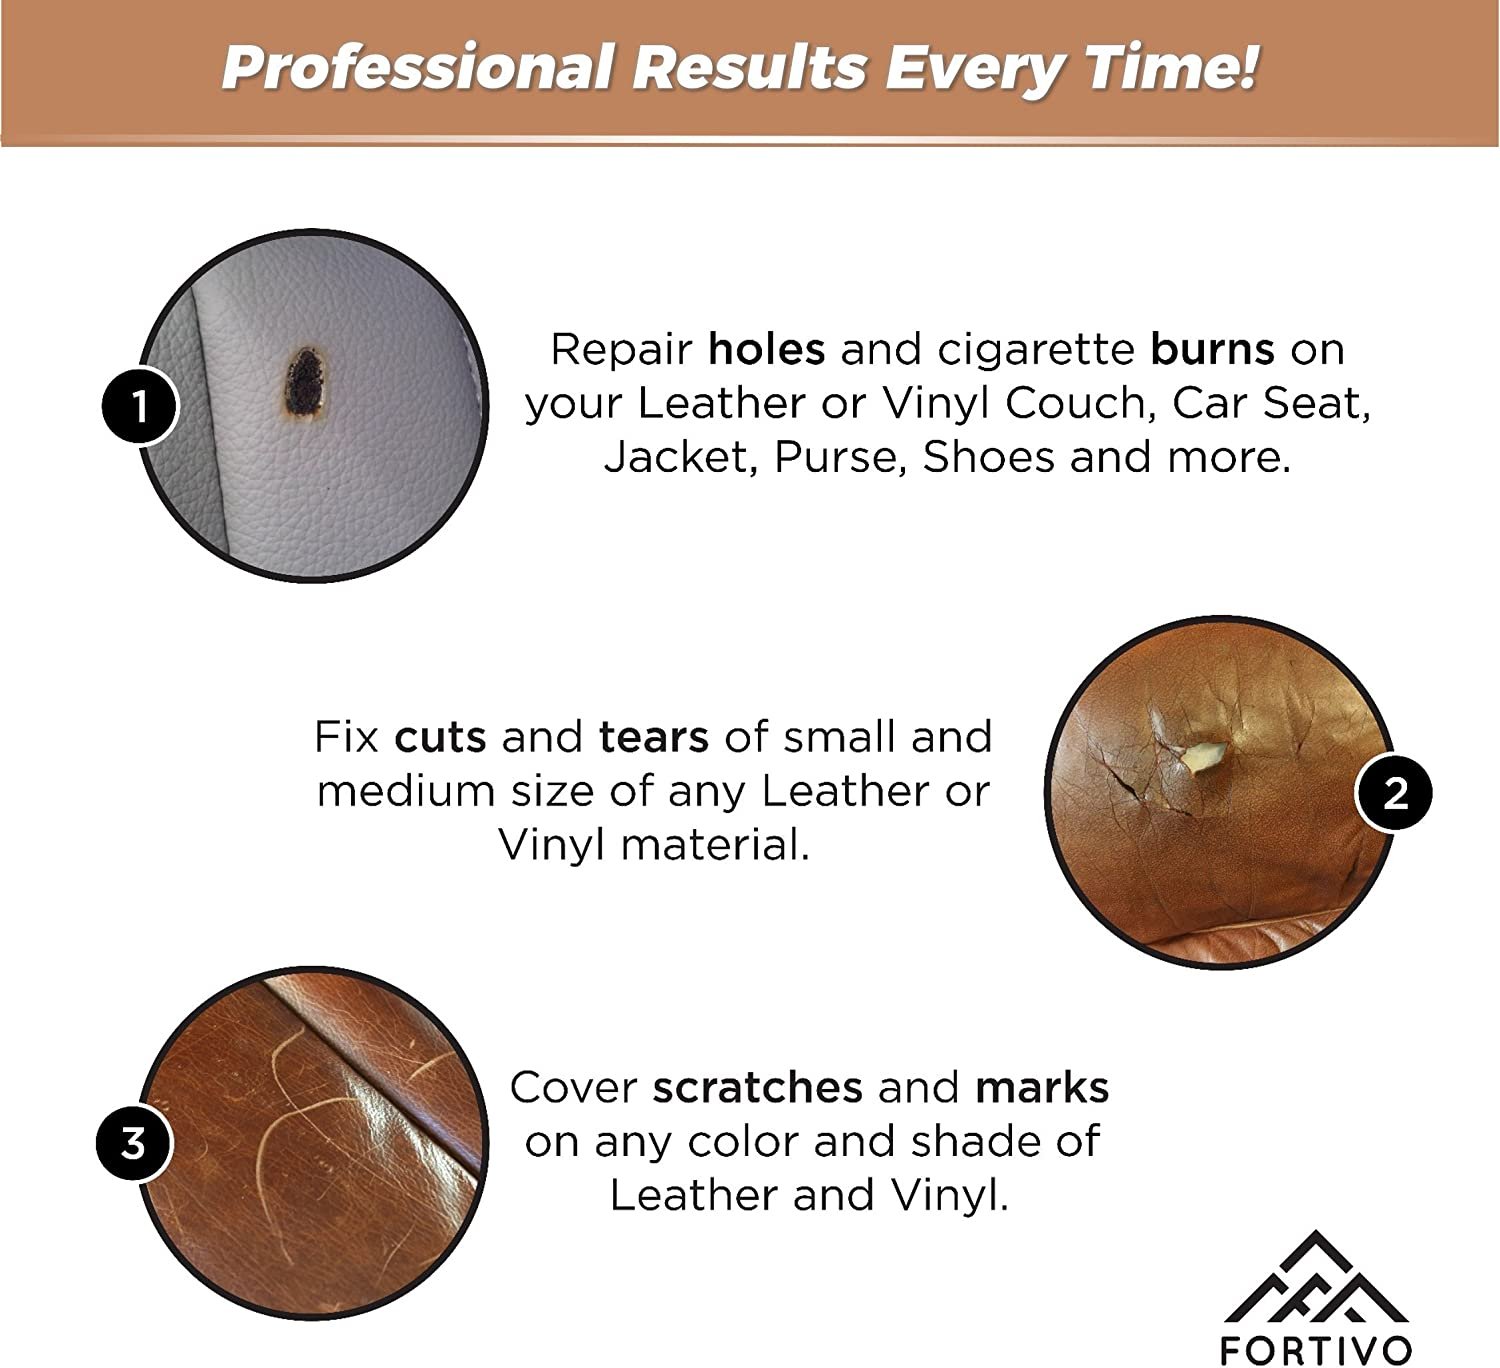 Leather and Vinyl Repair Kit - Furniture, Couch, Car Seats, Sofa, Jacket,  Purse, Belt, Shoes, Genuine, Italian, Bonded, Bycast, PU,Pleather, No  Heat Required